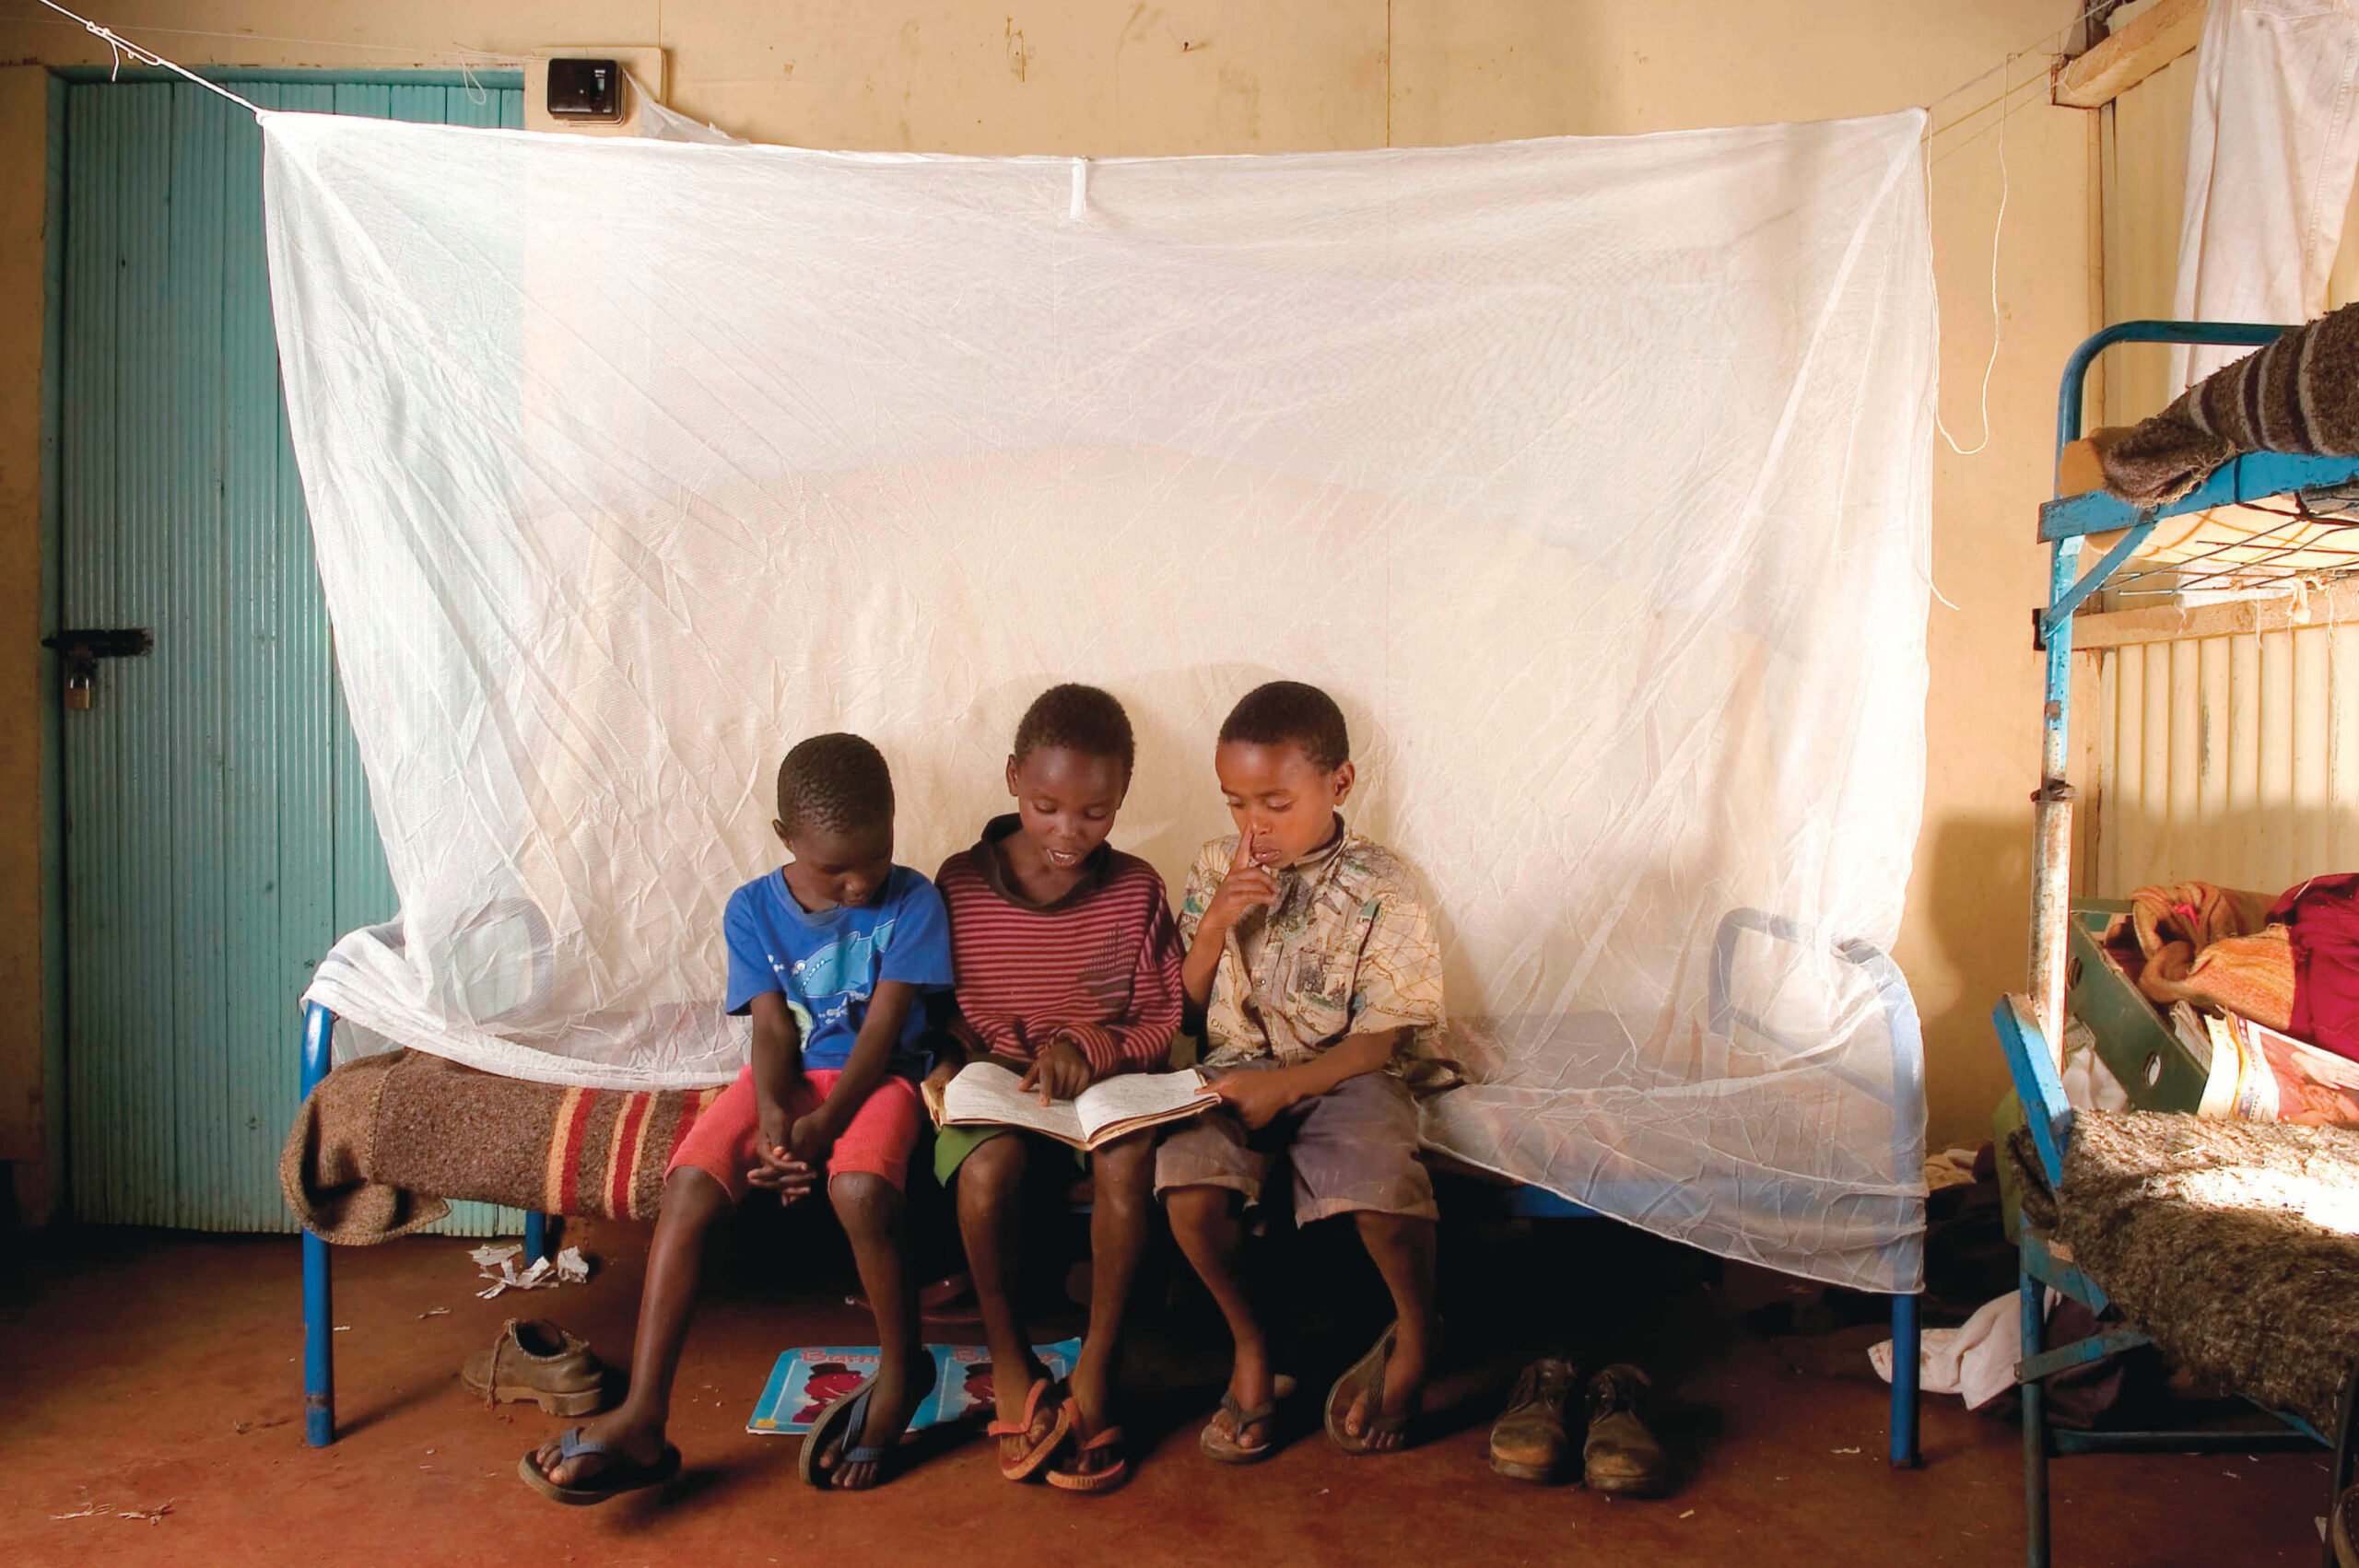 Maps and metrics of insecticide-treated net access, use, and nets